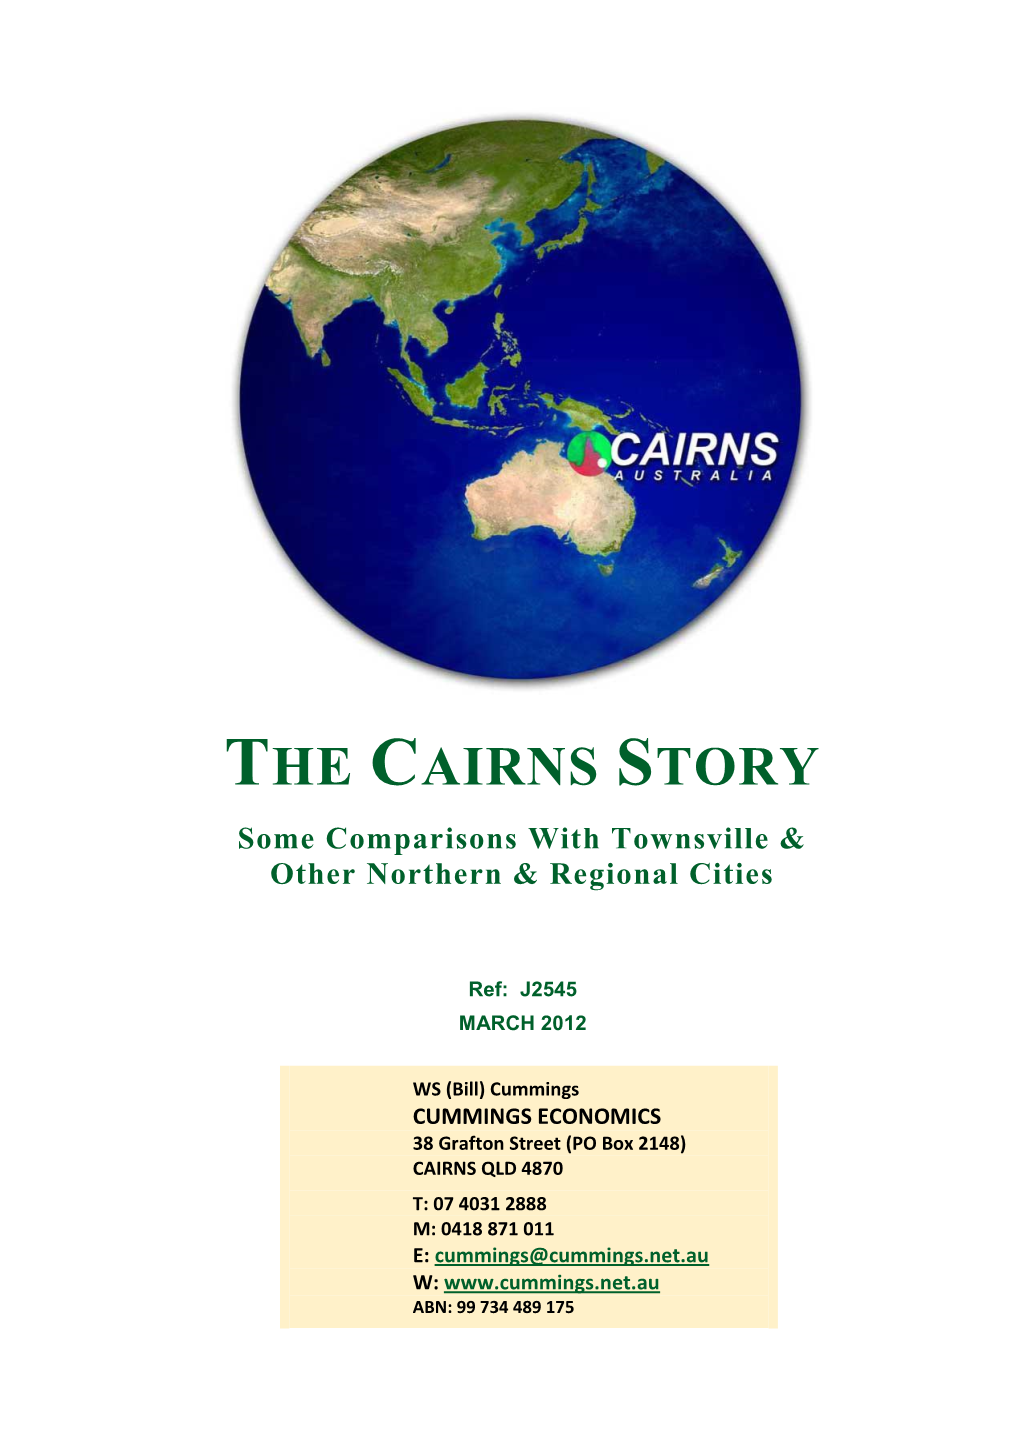 THE CAIRNS STORY Some Comparisons with Townsville & Other Northern & Regional Cities